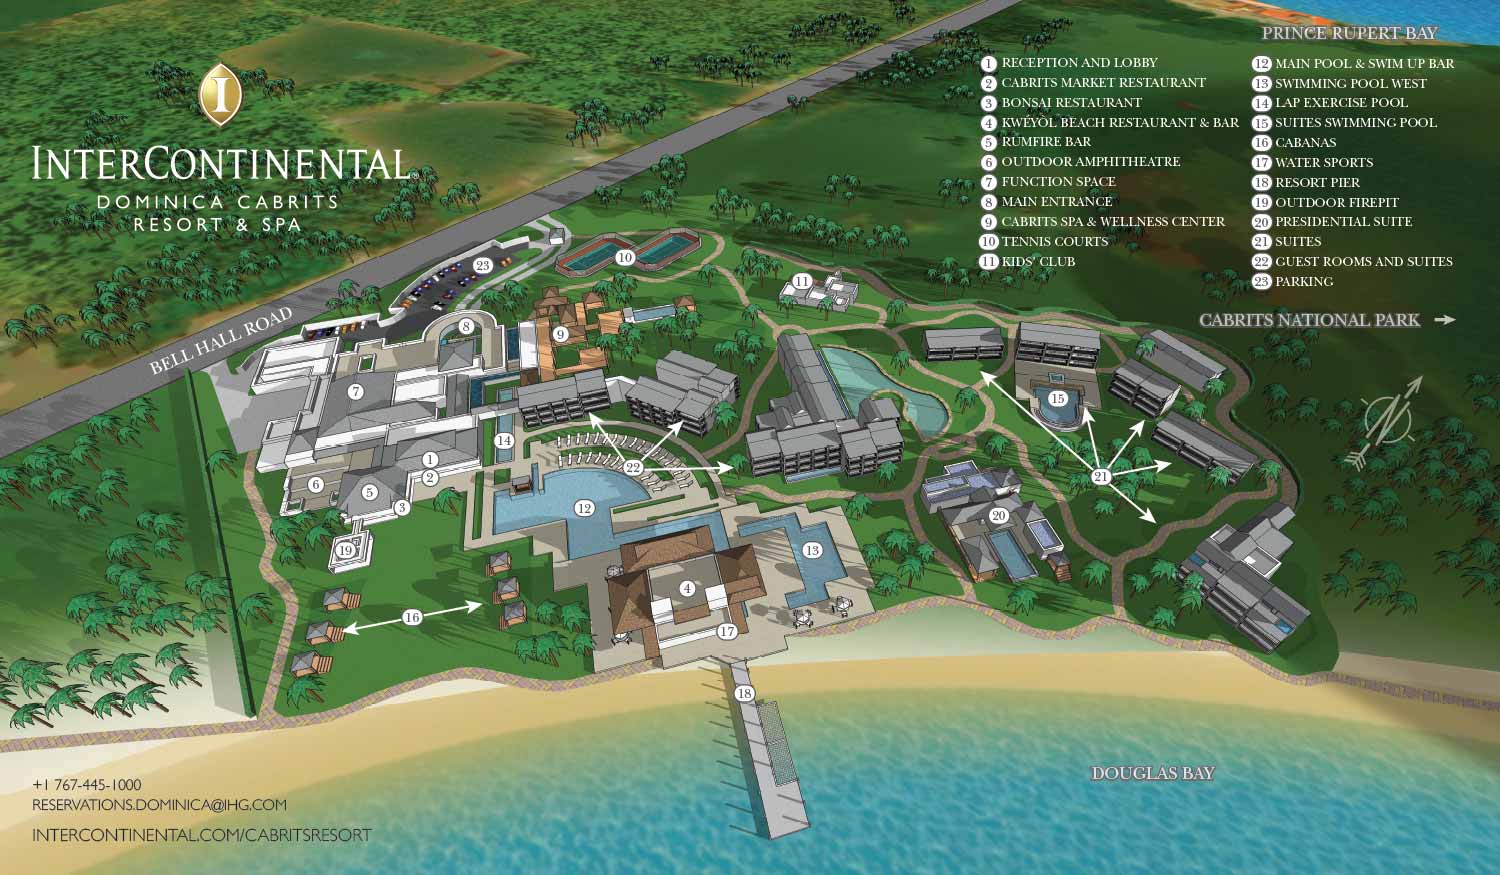 InterContinental Dominica Cabrits Resort and Spa Illustrated Map